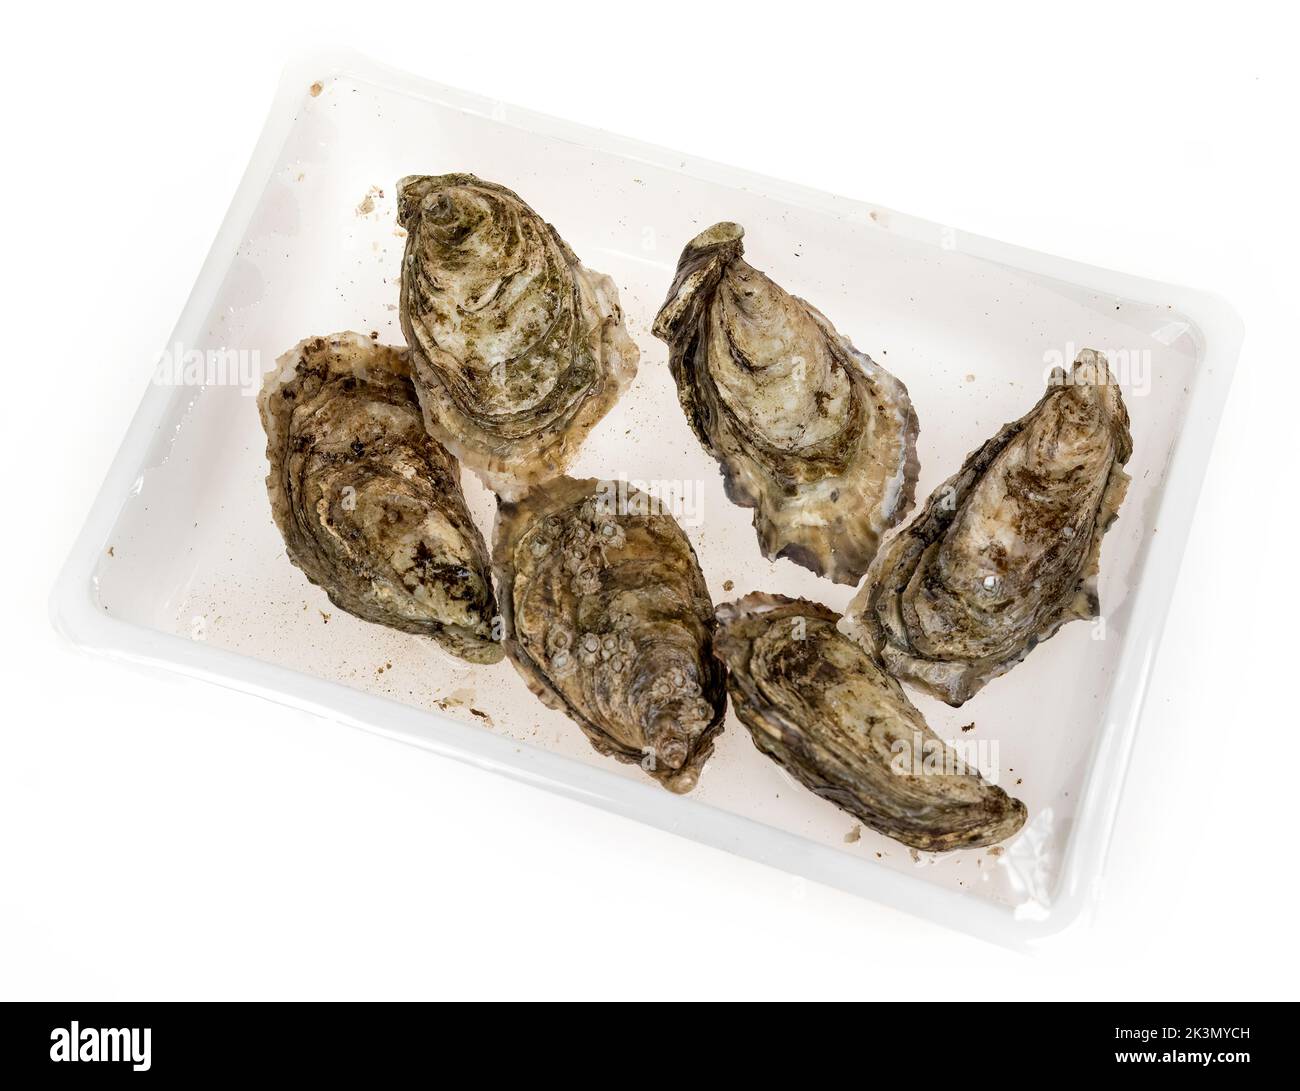 Live oysters as sold in plastic packaging by a supermarket, UK Stock Photo